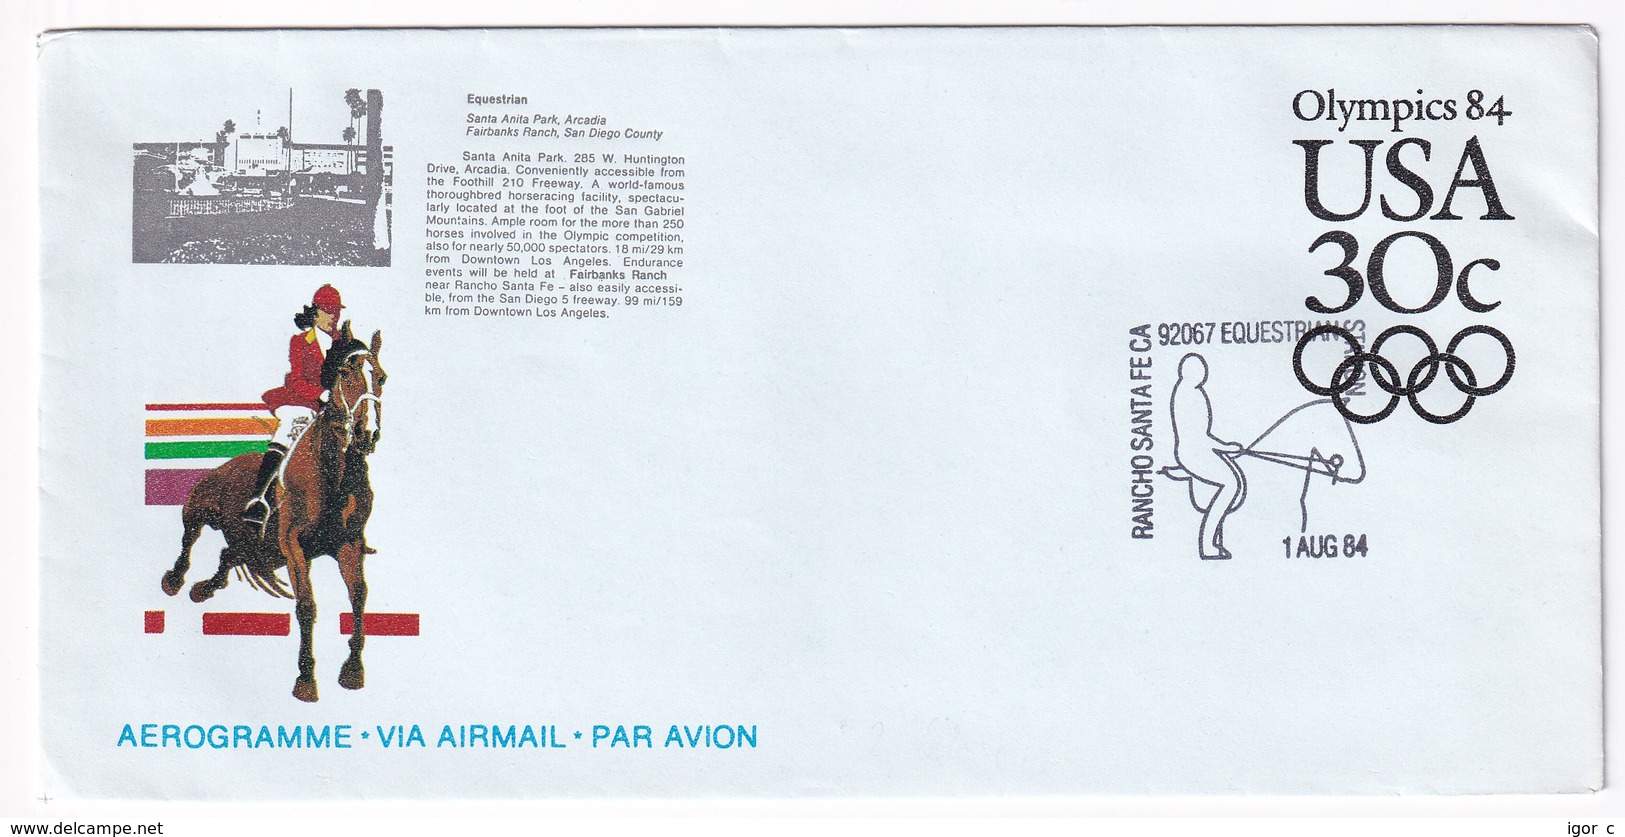 USA 1984 Postal Stationery Cover Aerogramme: Olympic Games Los Angeles; Equestrian; Hockey Tennis Bobsleigh Judo Rowing - Sommer 1984: Los Angeles